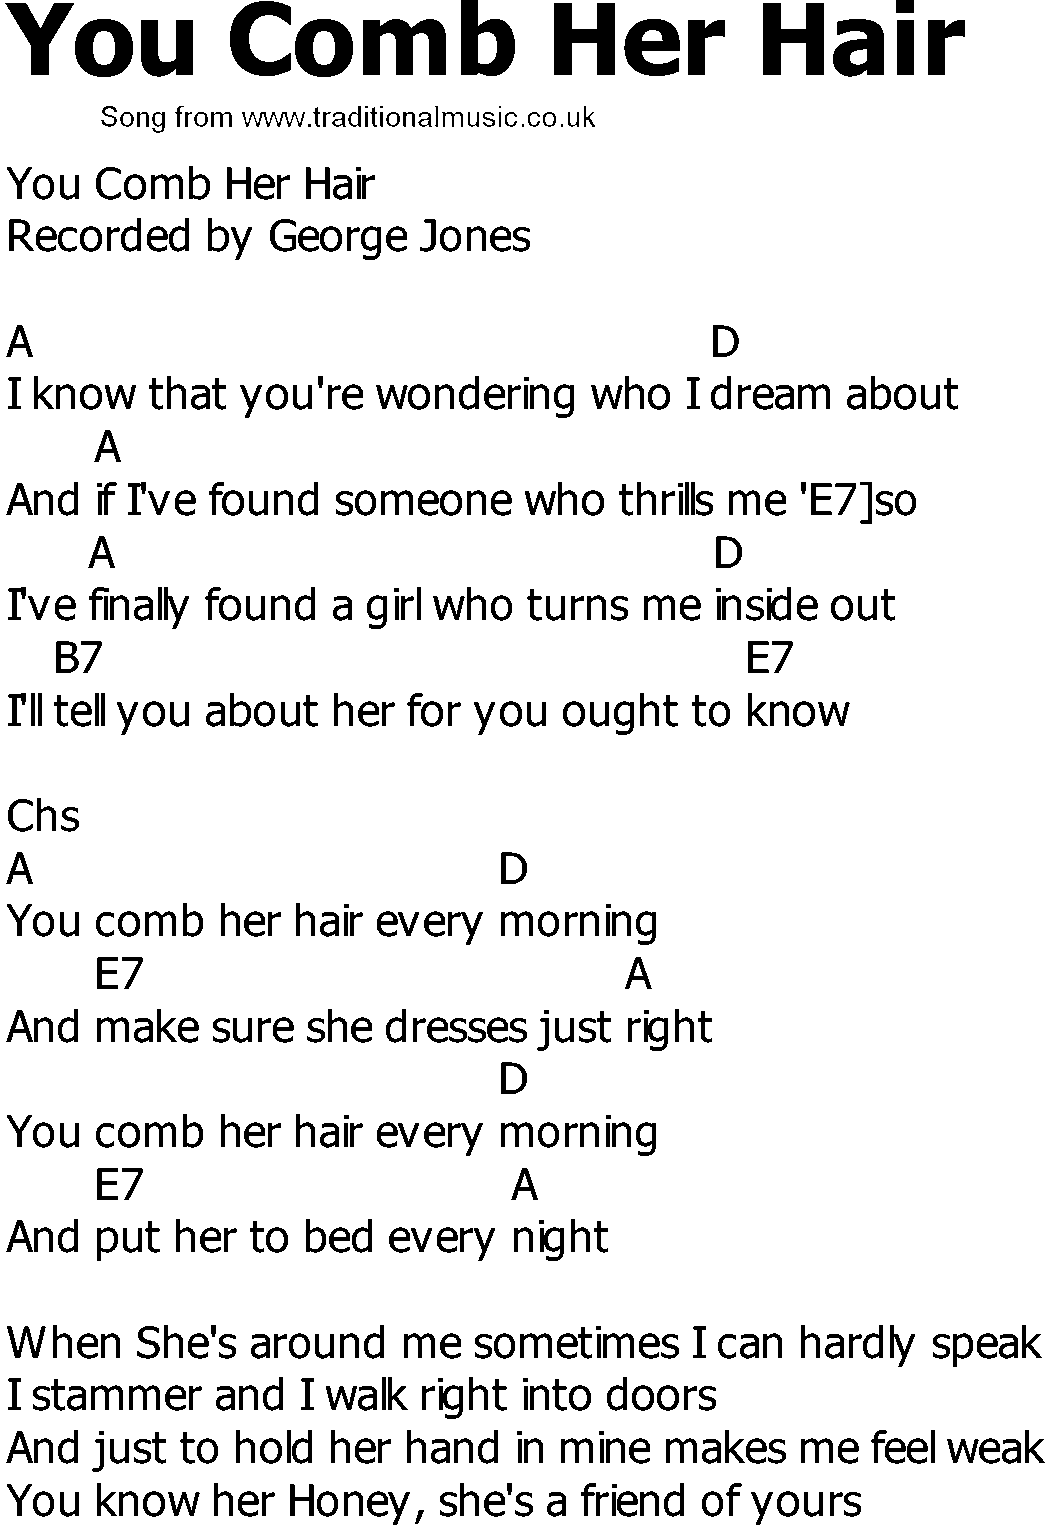 Old Country song lyrics with chords - You Comb Her Hair